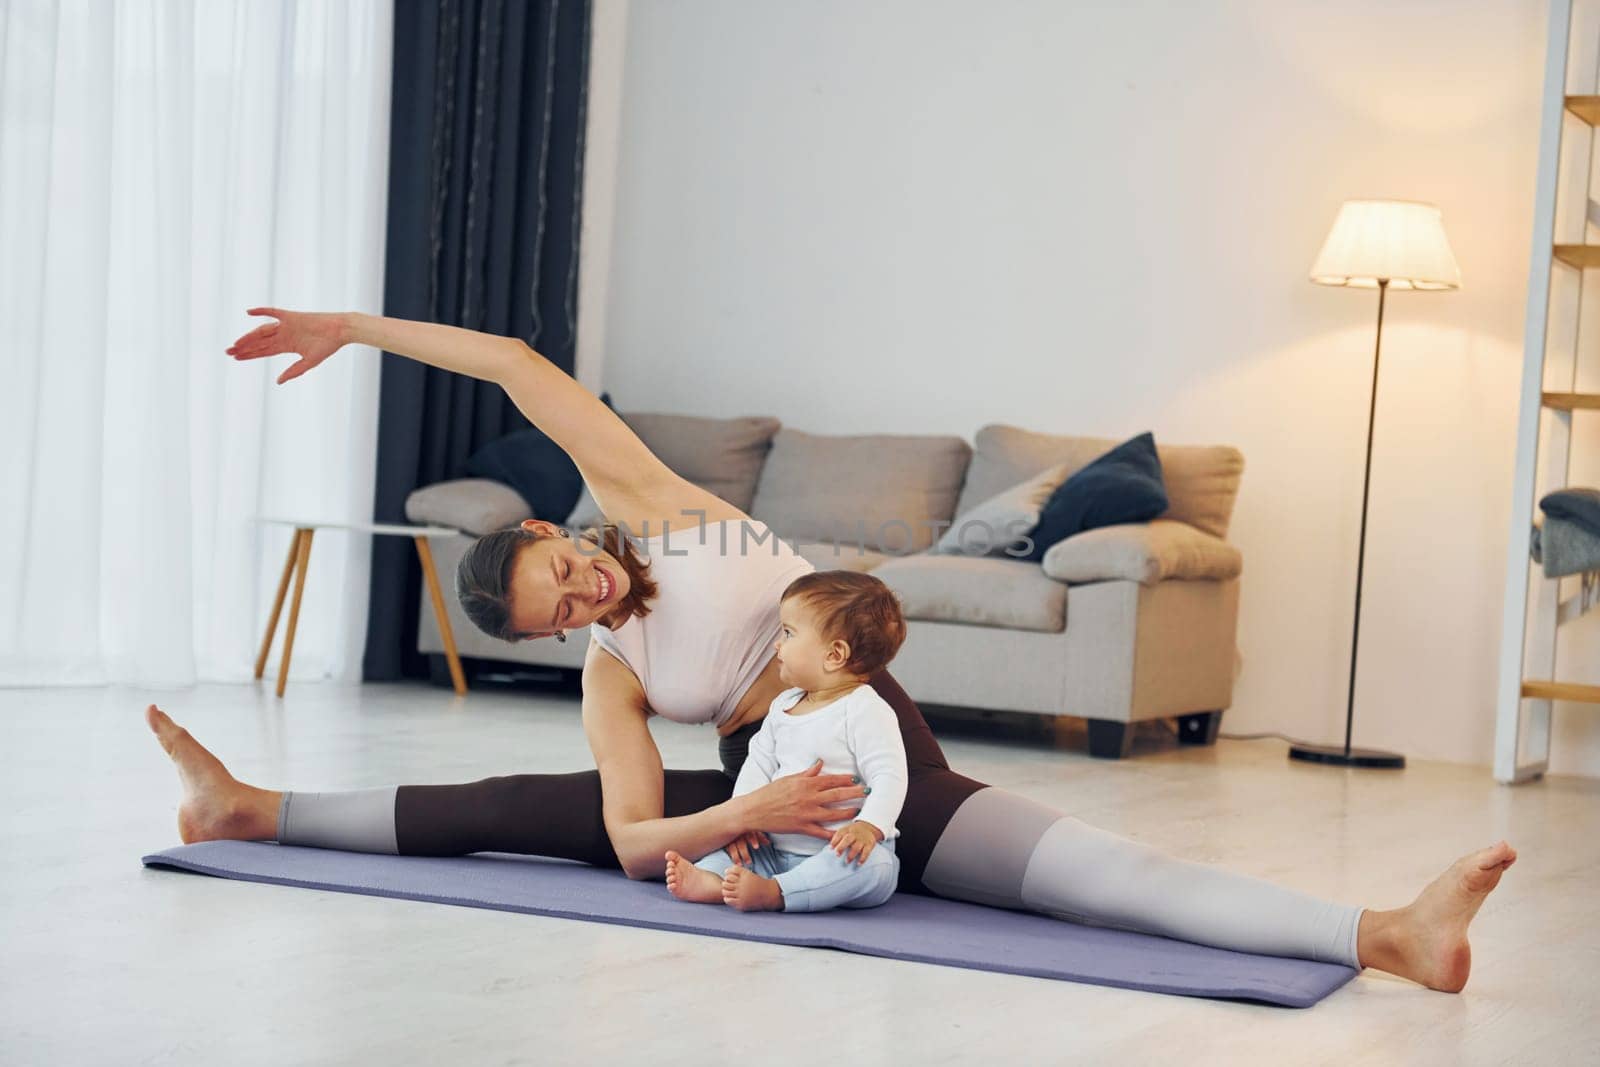 Doing fitness together. Mother with her little daughter is at home together.